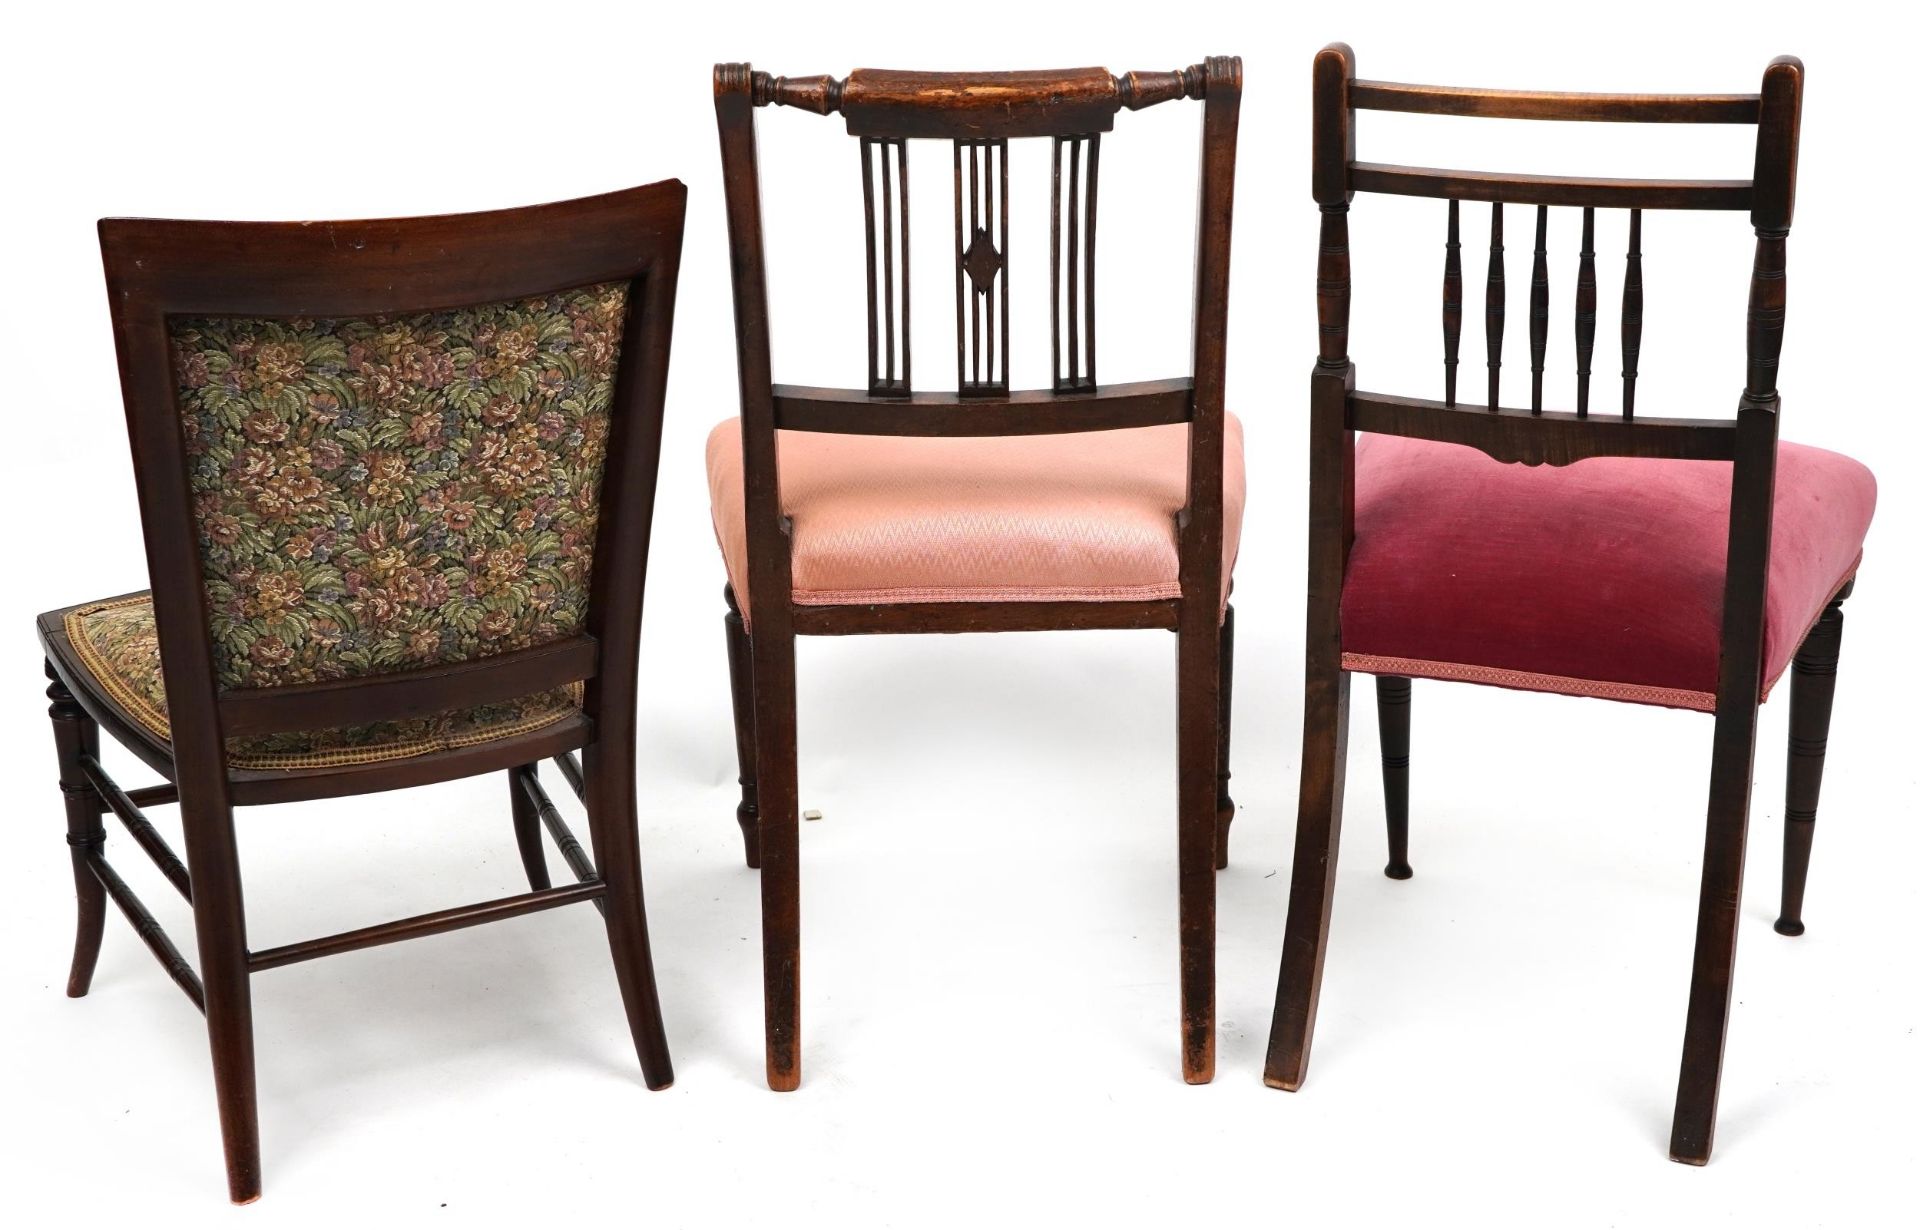 Three 19th century occasional chairs including an inlaid rosewood example, the largest 84cm high : - Image 3 of 3